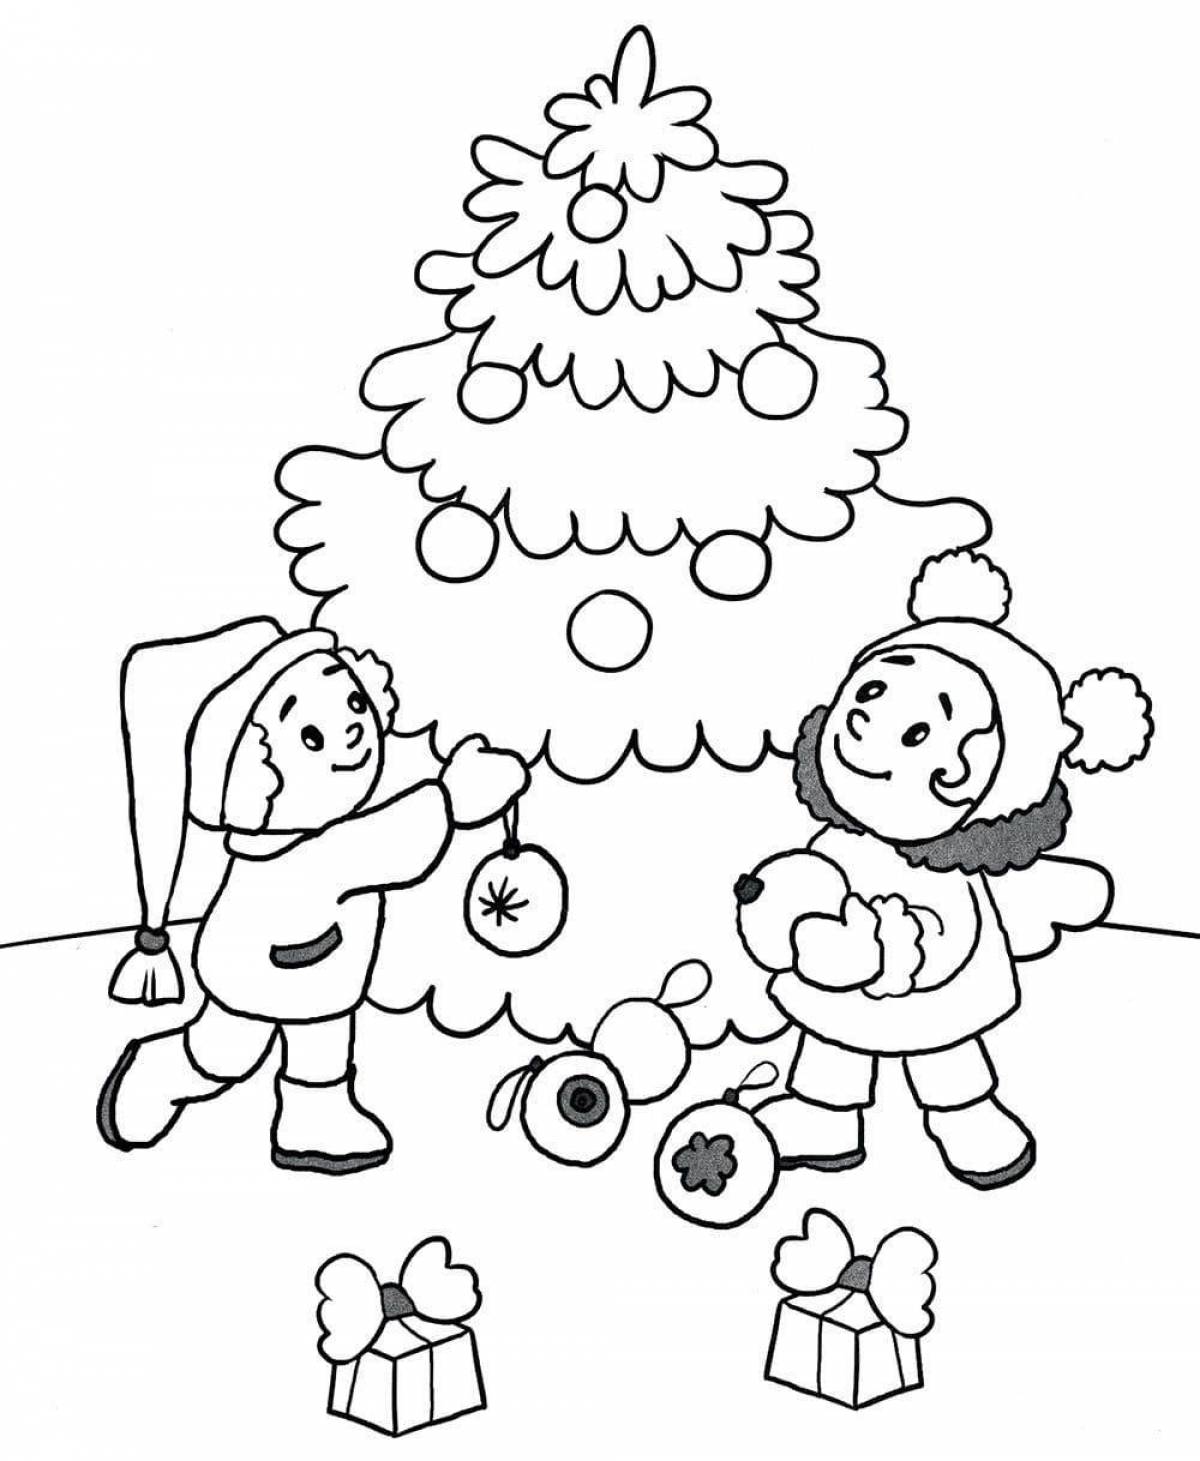 Playful tree coloring page for 3-4 year olds